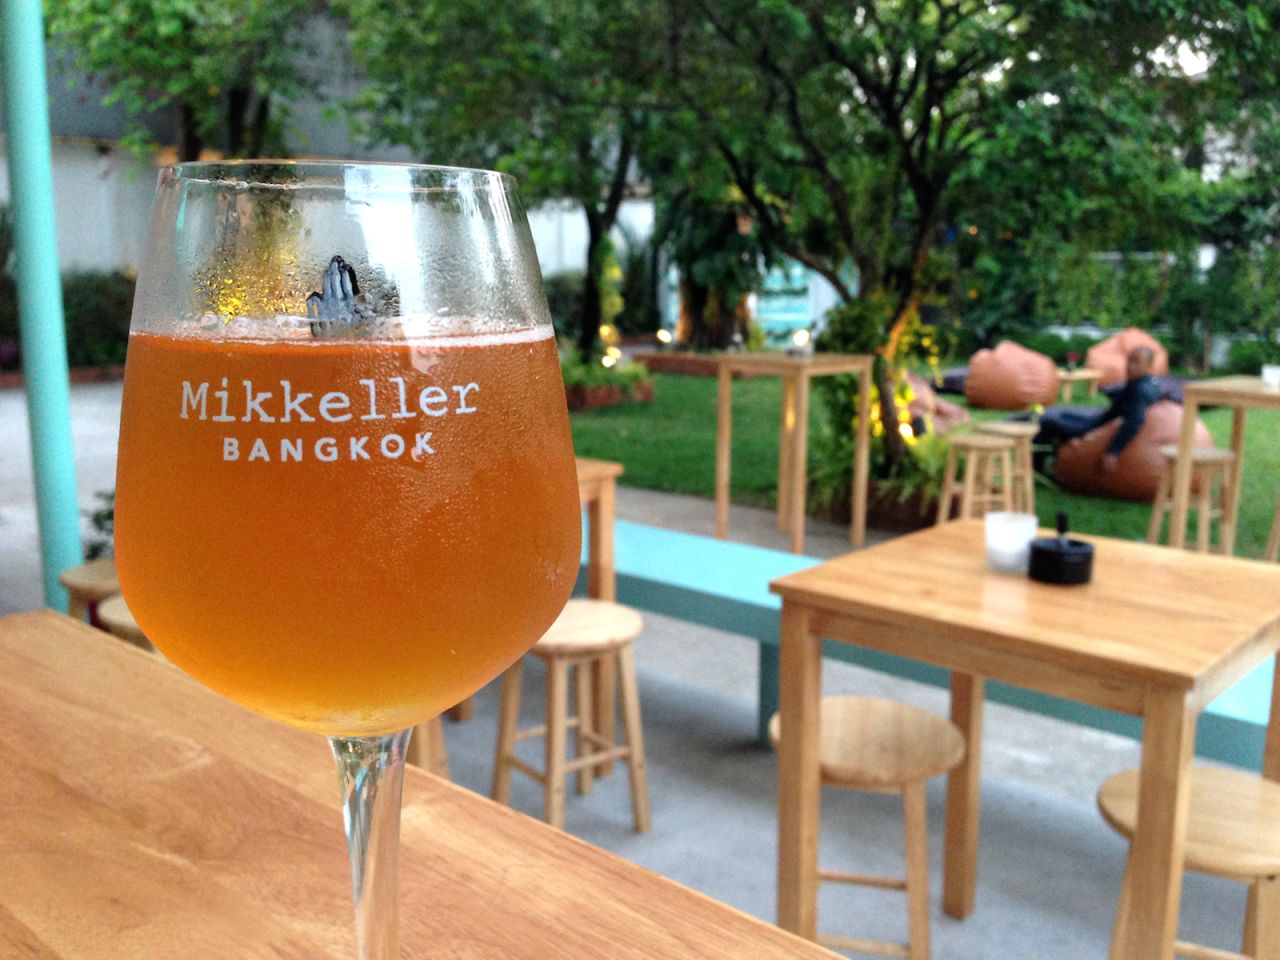 Opened in January and modeled after the bright, cheerful design of Mikkeller & Friends bar in Copenhagen, Mikkeller Bangkok is the brand's first bar in Asia. 